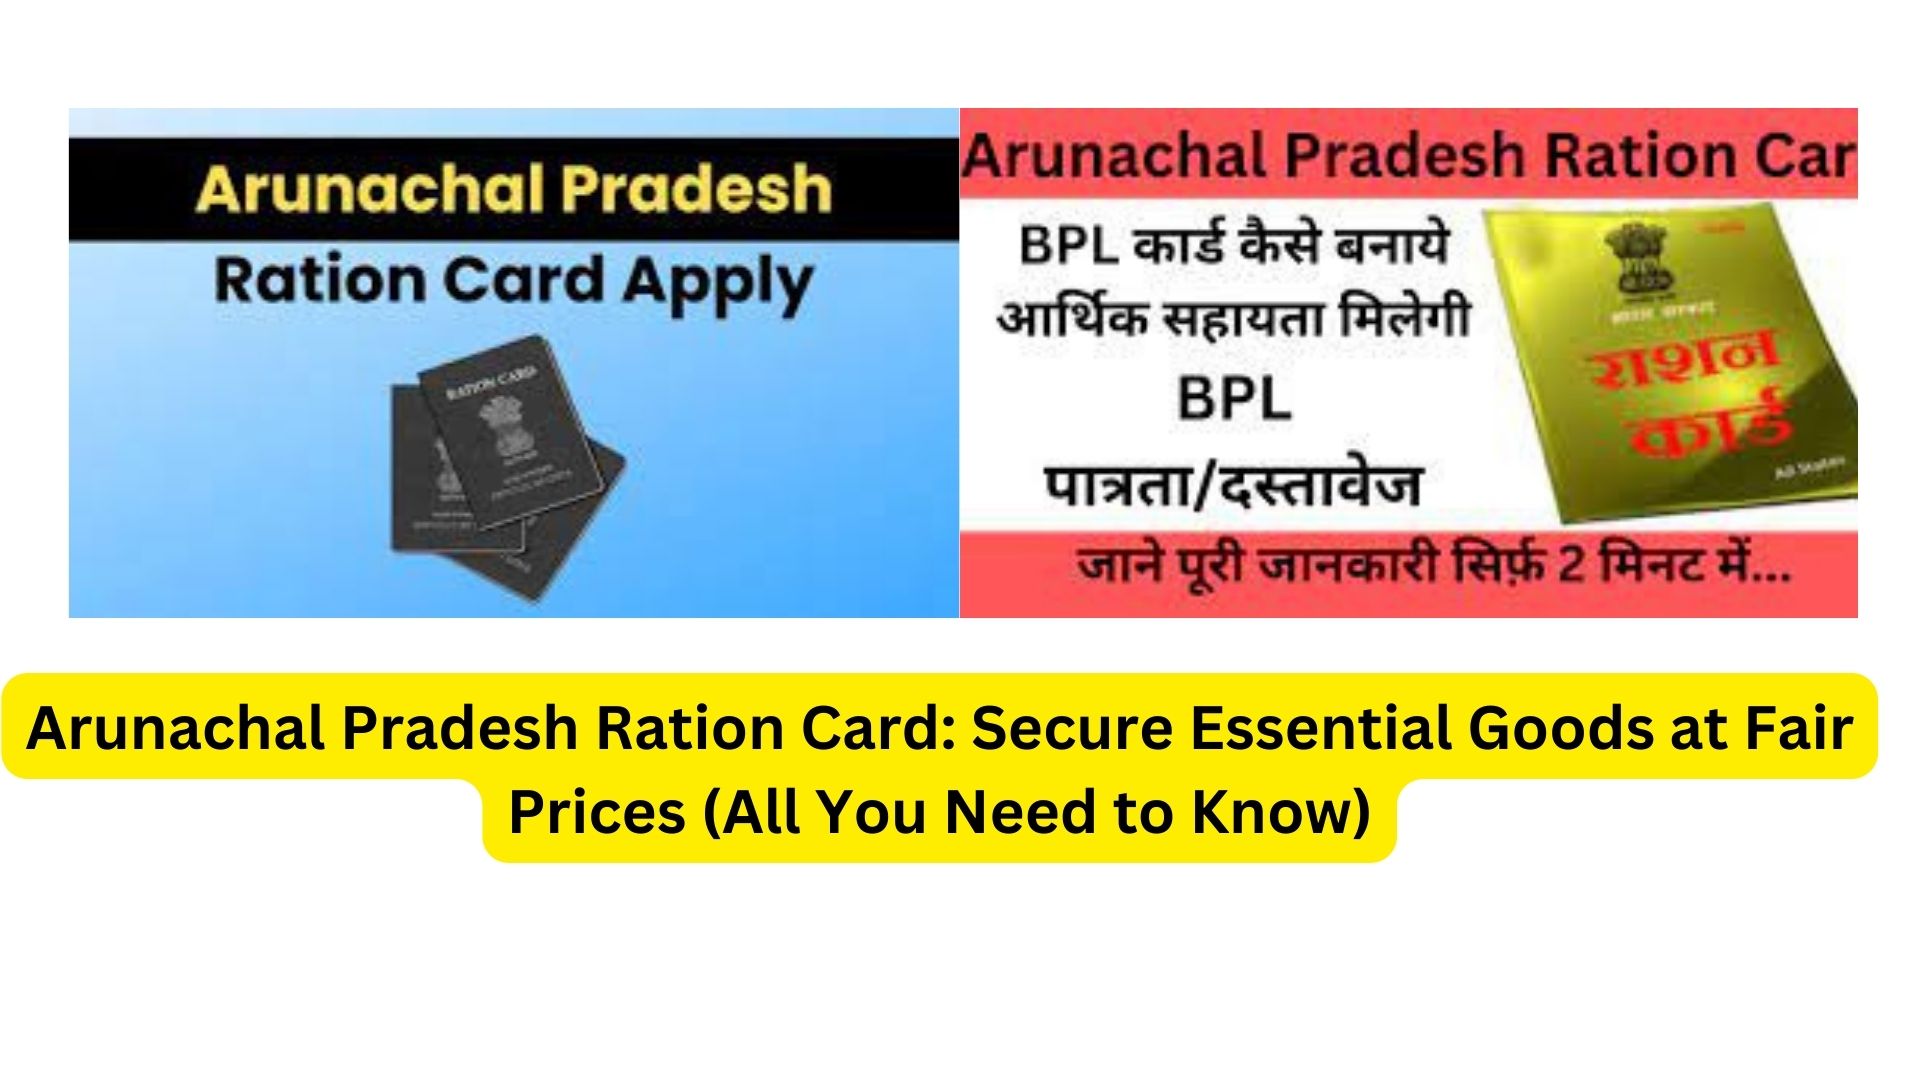 Arunachal Pradesh Ration Card: Secure Essential Goods at Fair Prices (All You Need to Know)